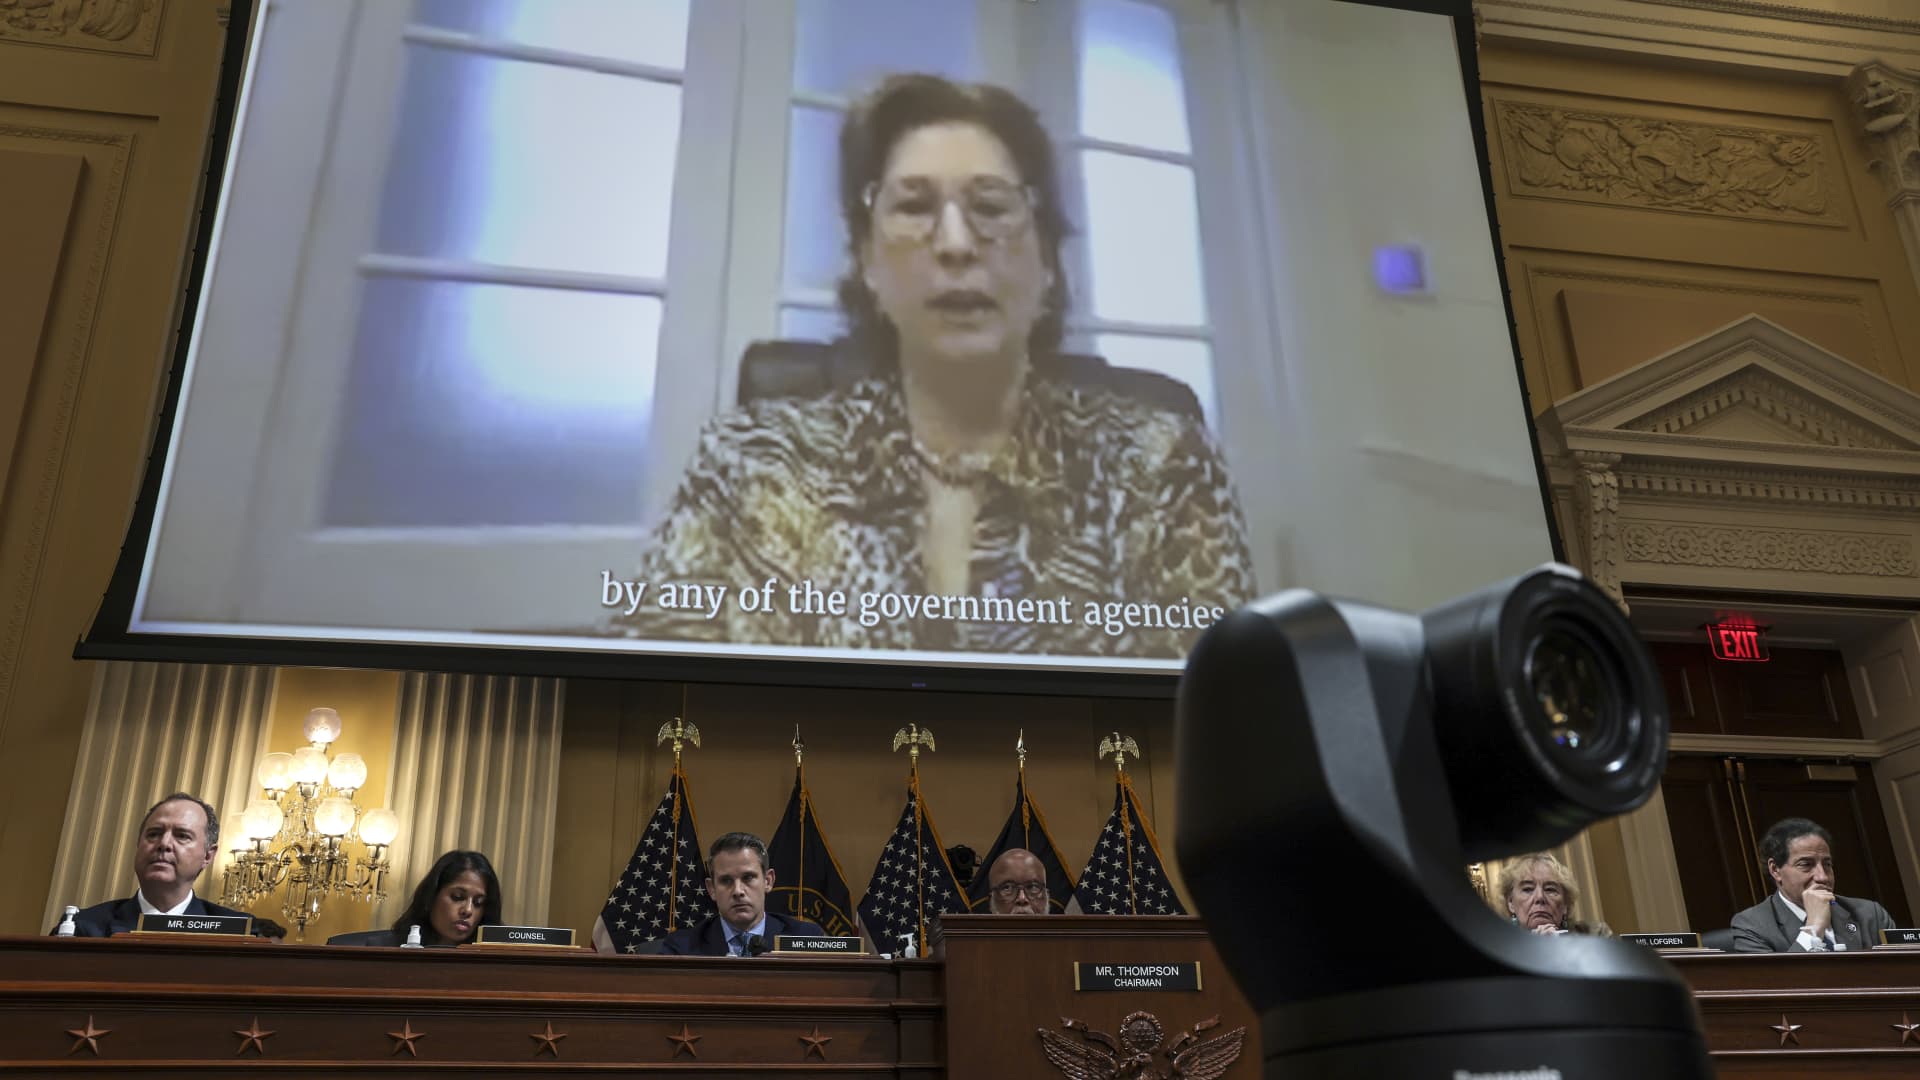 A video featuring Sidney Powell, President Trump's Campaign Attorney, is played during the fifth hearing by the House Select Committee to Investigate the January 6th Attack on the U.S. Capitol in the Cannon House Office Building on June 23, 2022 in Washington, DC.